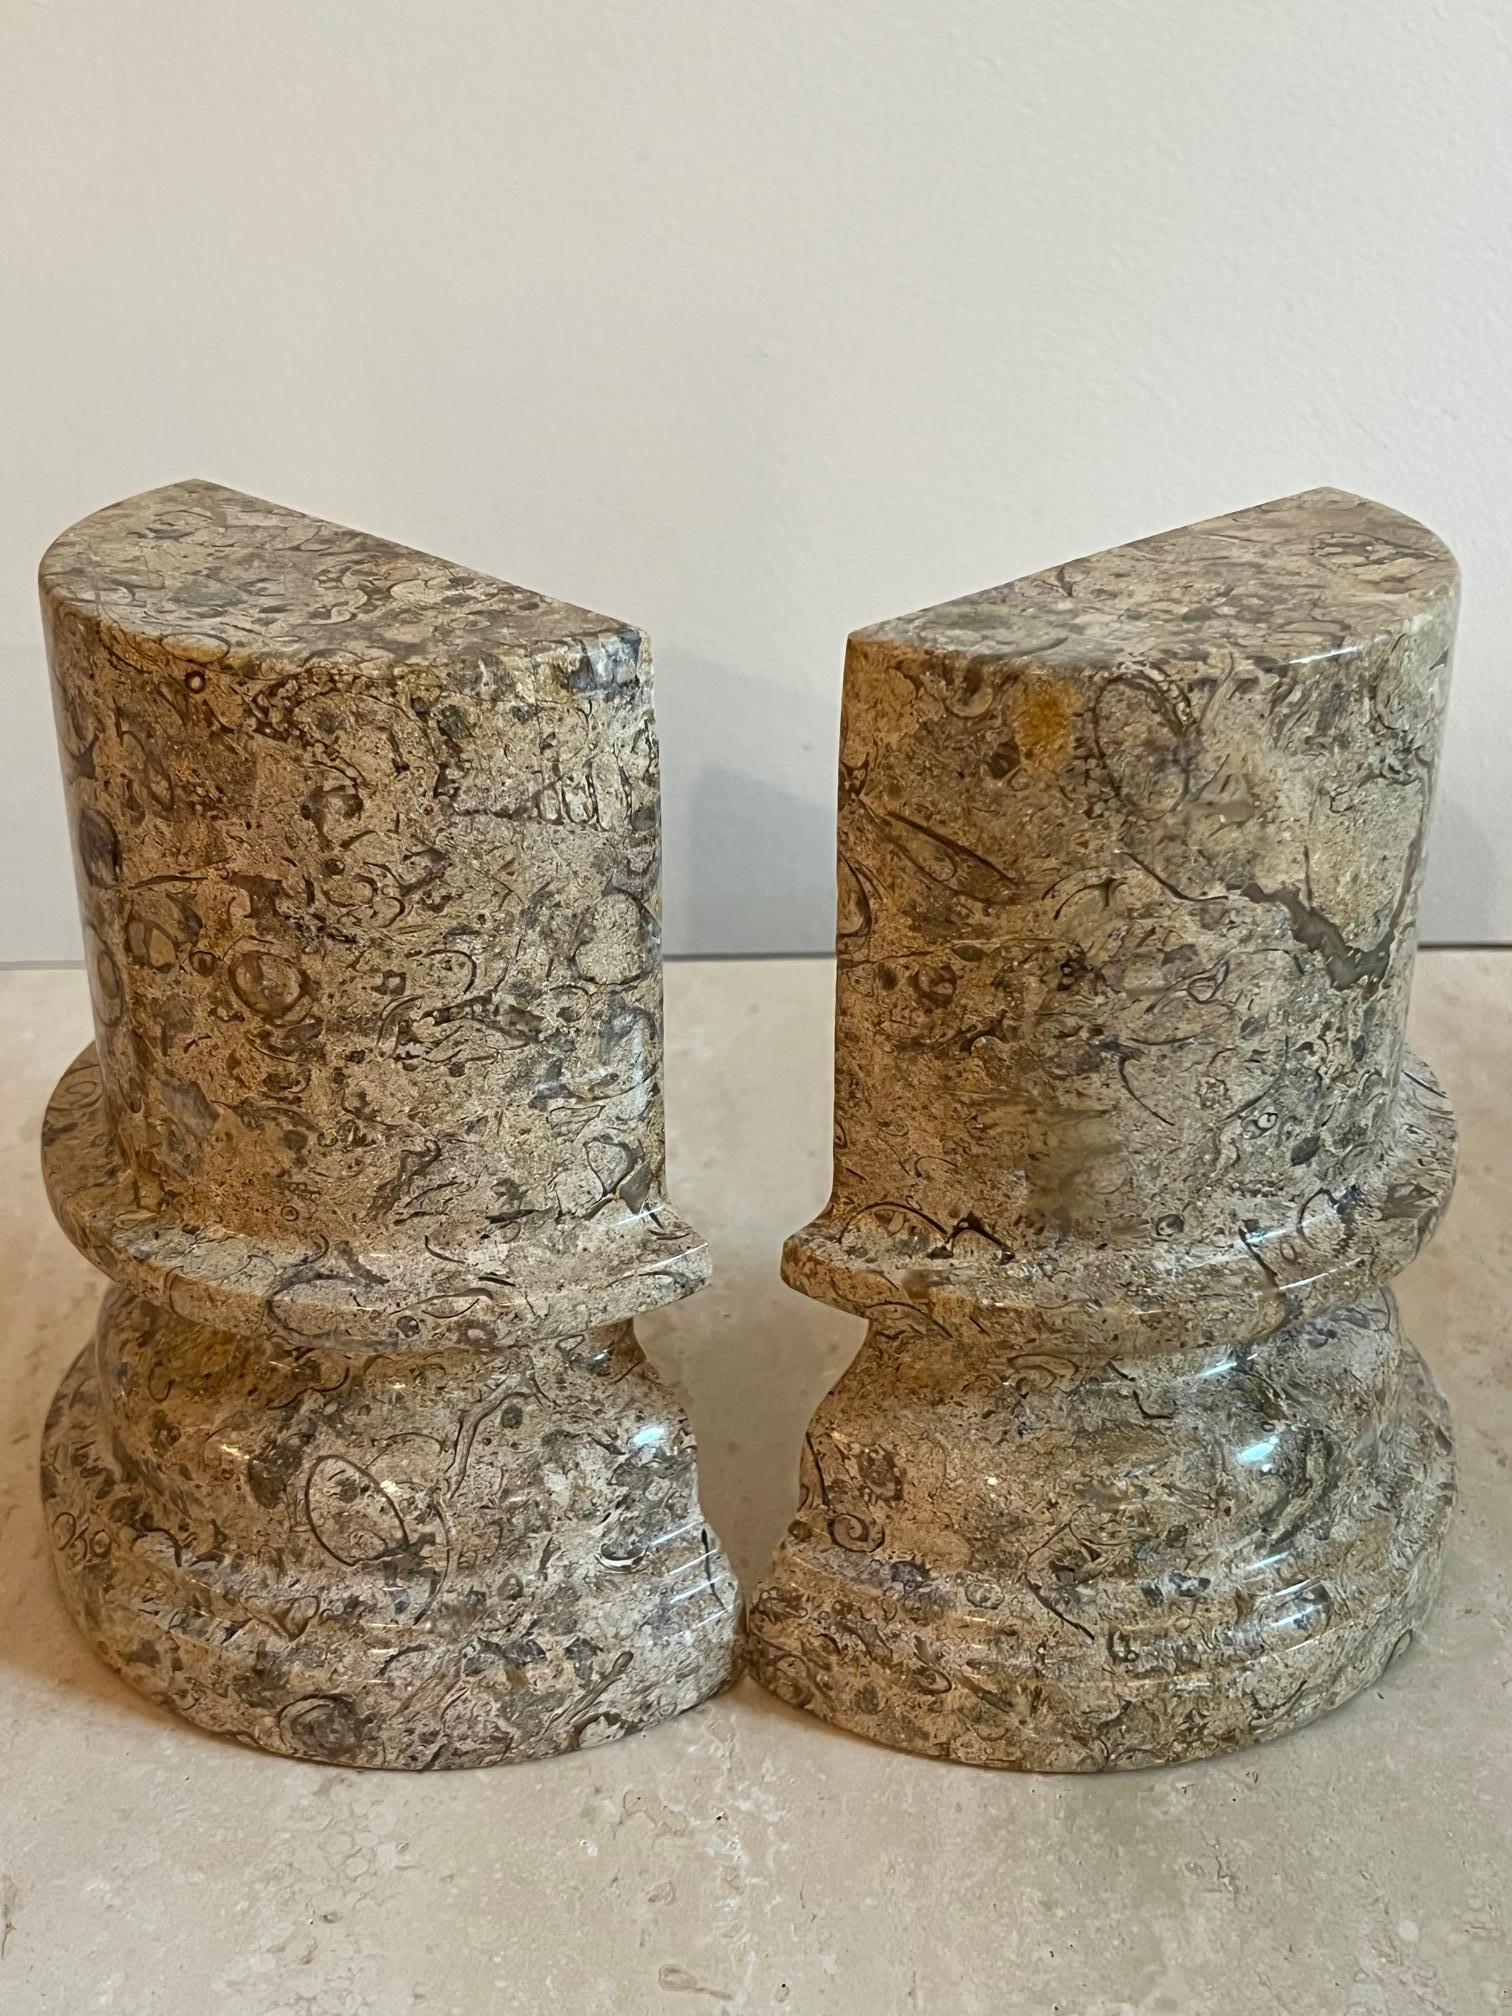 This pair of hand-carved bookends with fossilized shells embedded in solid stone makes for a chic addition to any bookcase or interior.  With natural neutral tones, suitable for an organic modern decor. 
Italy, circa, 1980’s
Size: 6 3/4